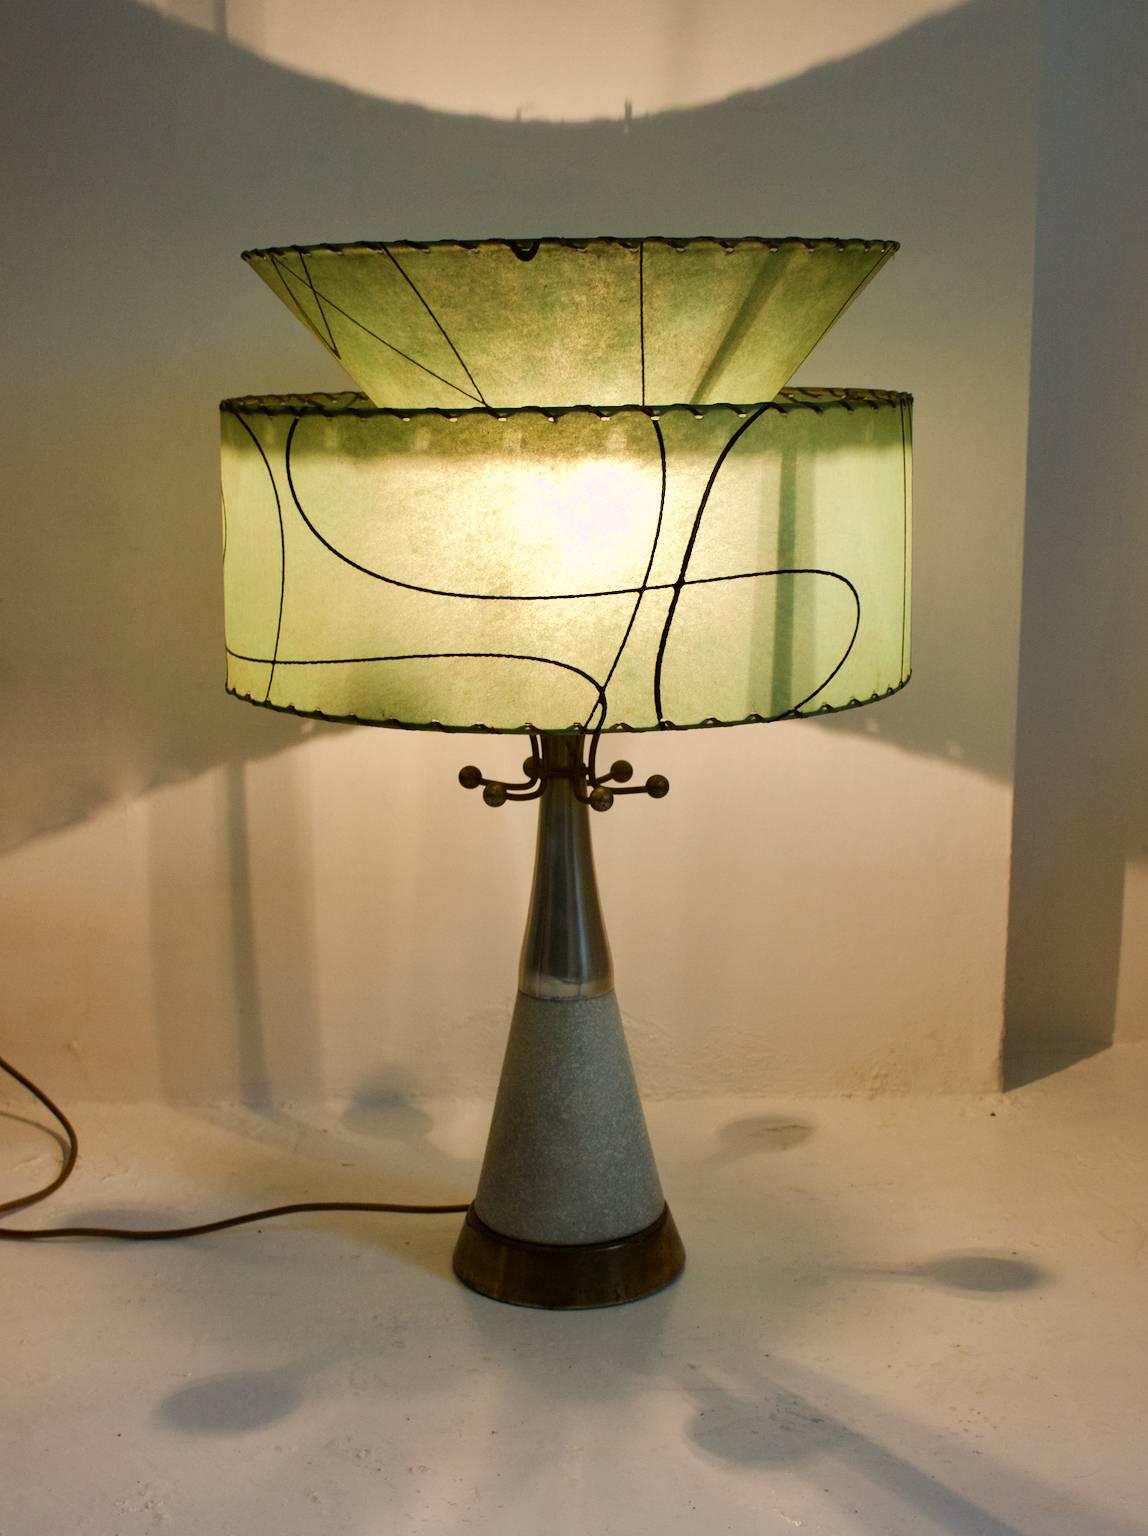 Mid-20th Century Ceramic and Brass Table Lamp with Atomic Details and Fibreglass Shade, 1950s